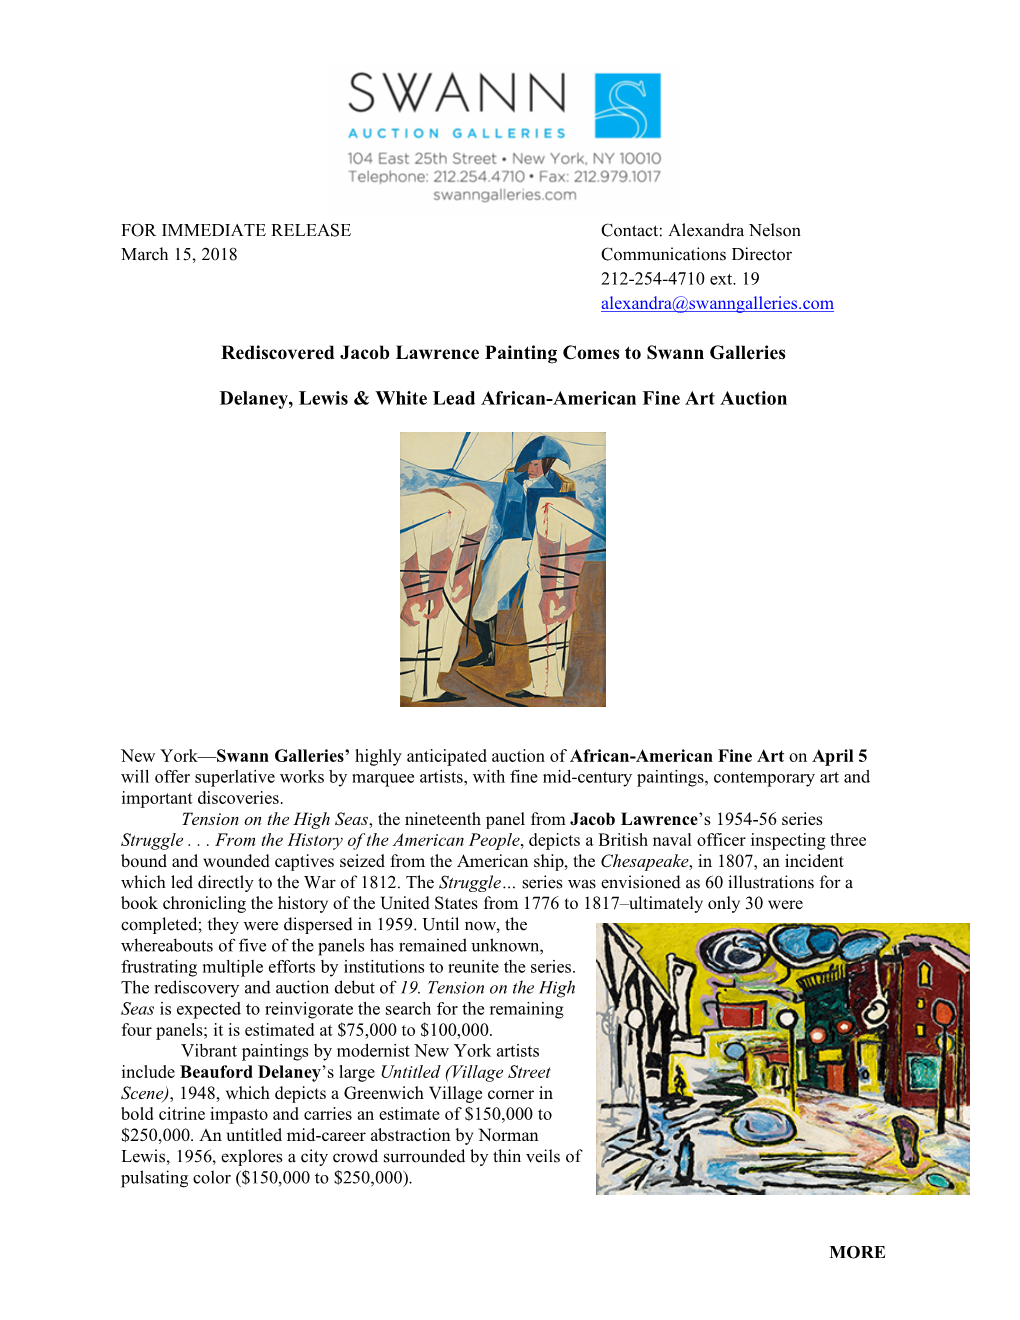 Rediscovered Jacob Lawrence Painting Comes to Swann Galleries